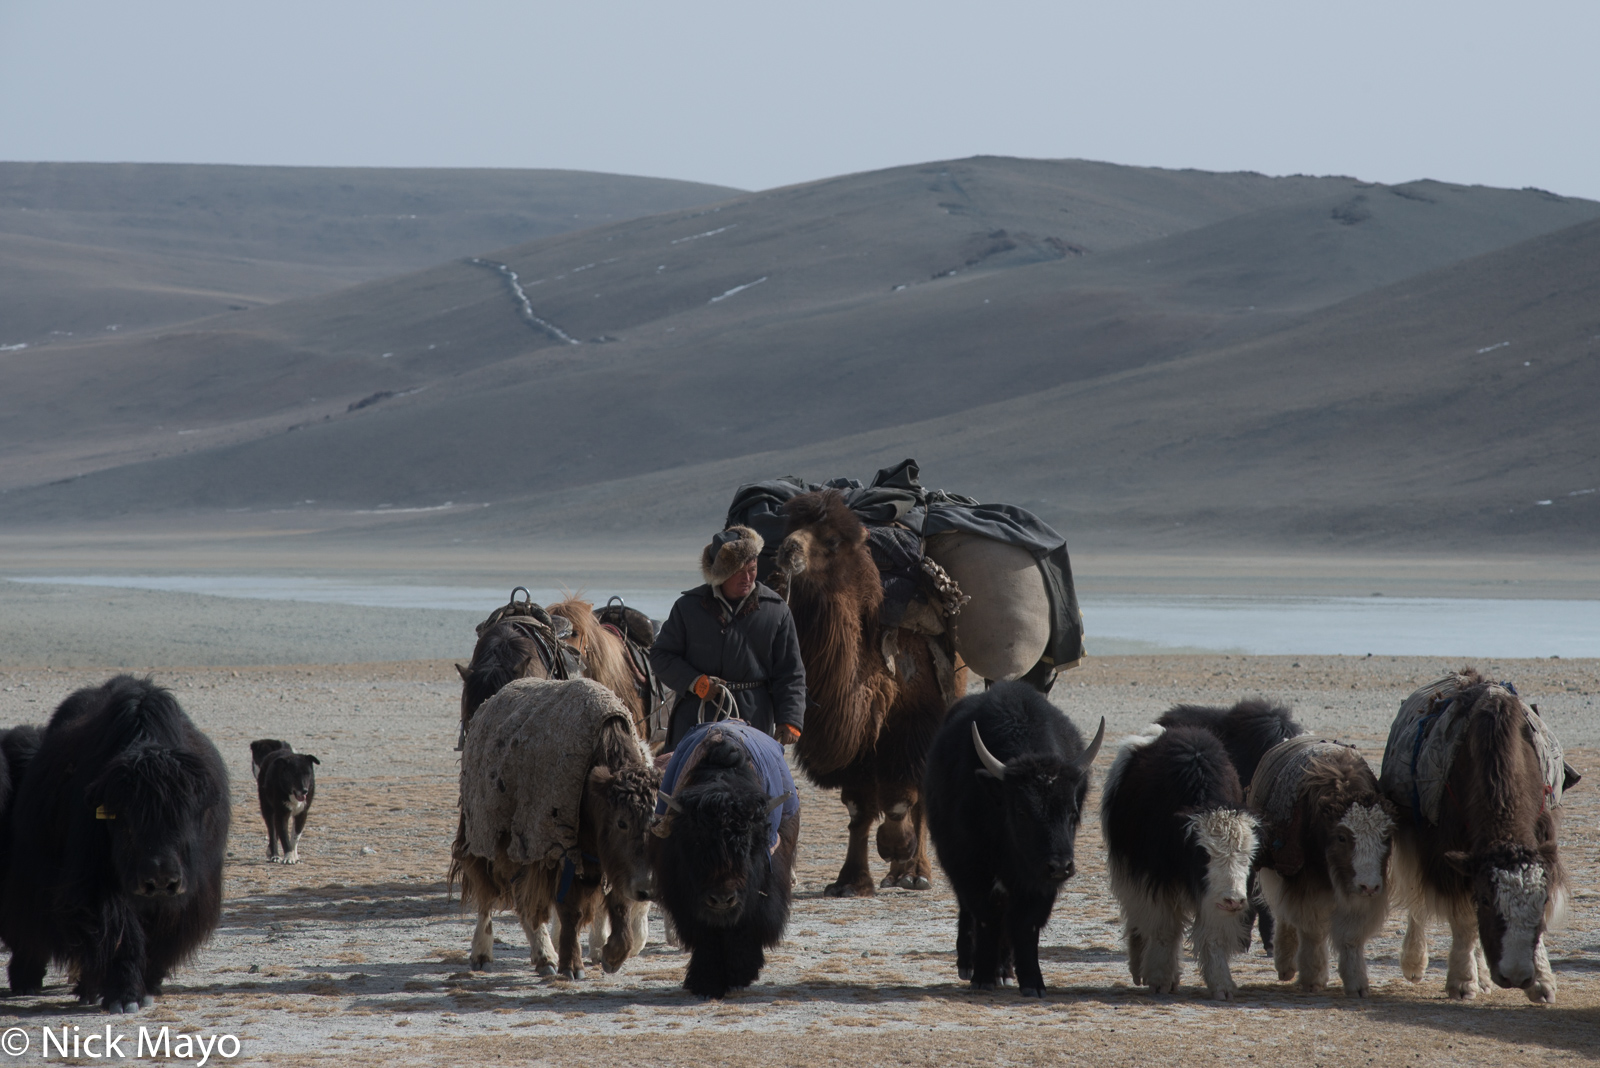 A Kazakh, leading a horse and pack camel, herding young yaks during their spring migration in Sagsai sum.